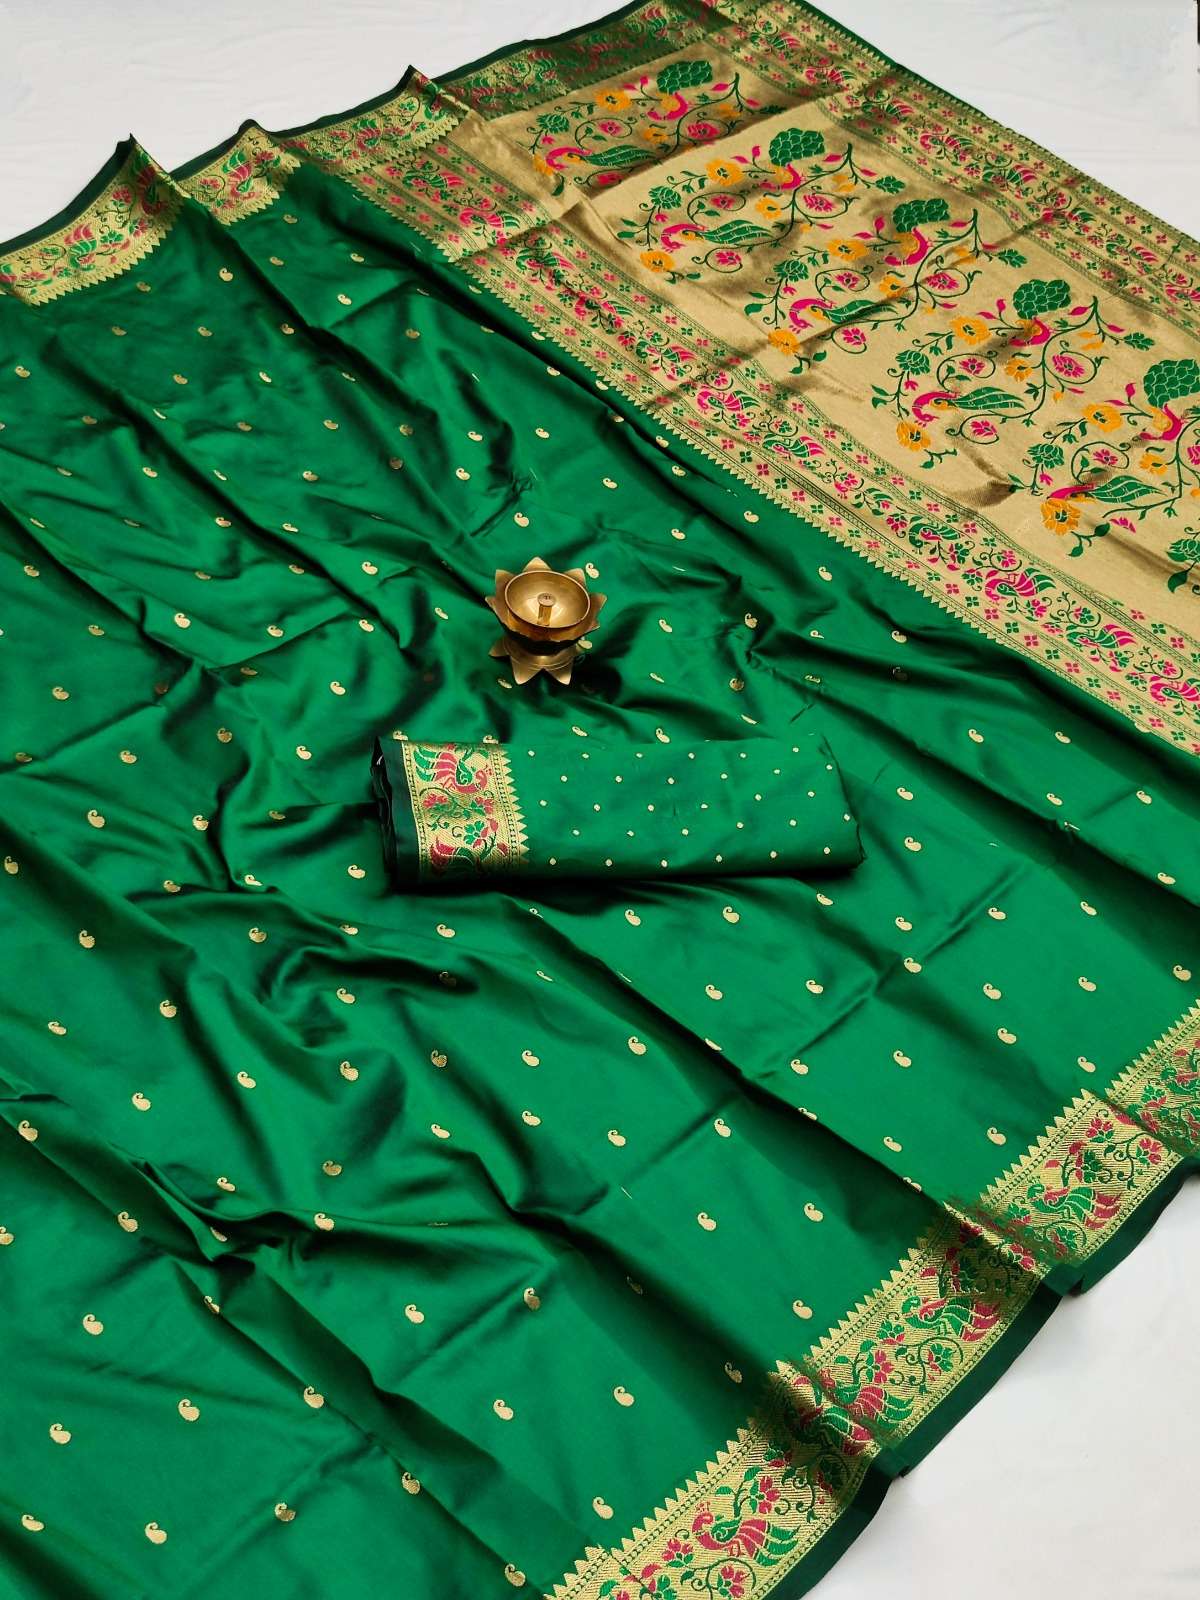  LATEST LAUNCH OF PAITHANI SILK WITH FINNEST WEAVING SAREES ...